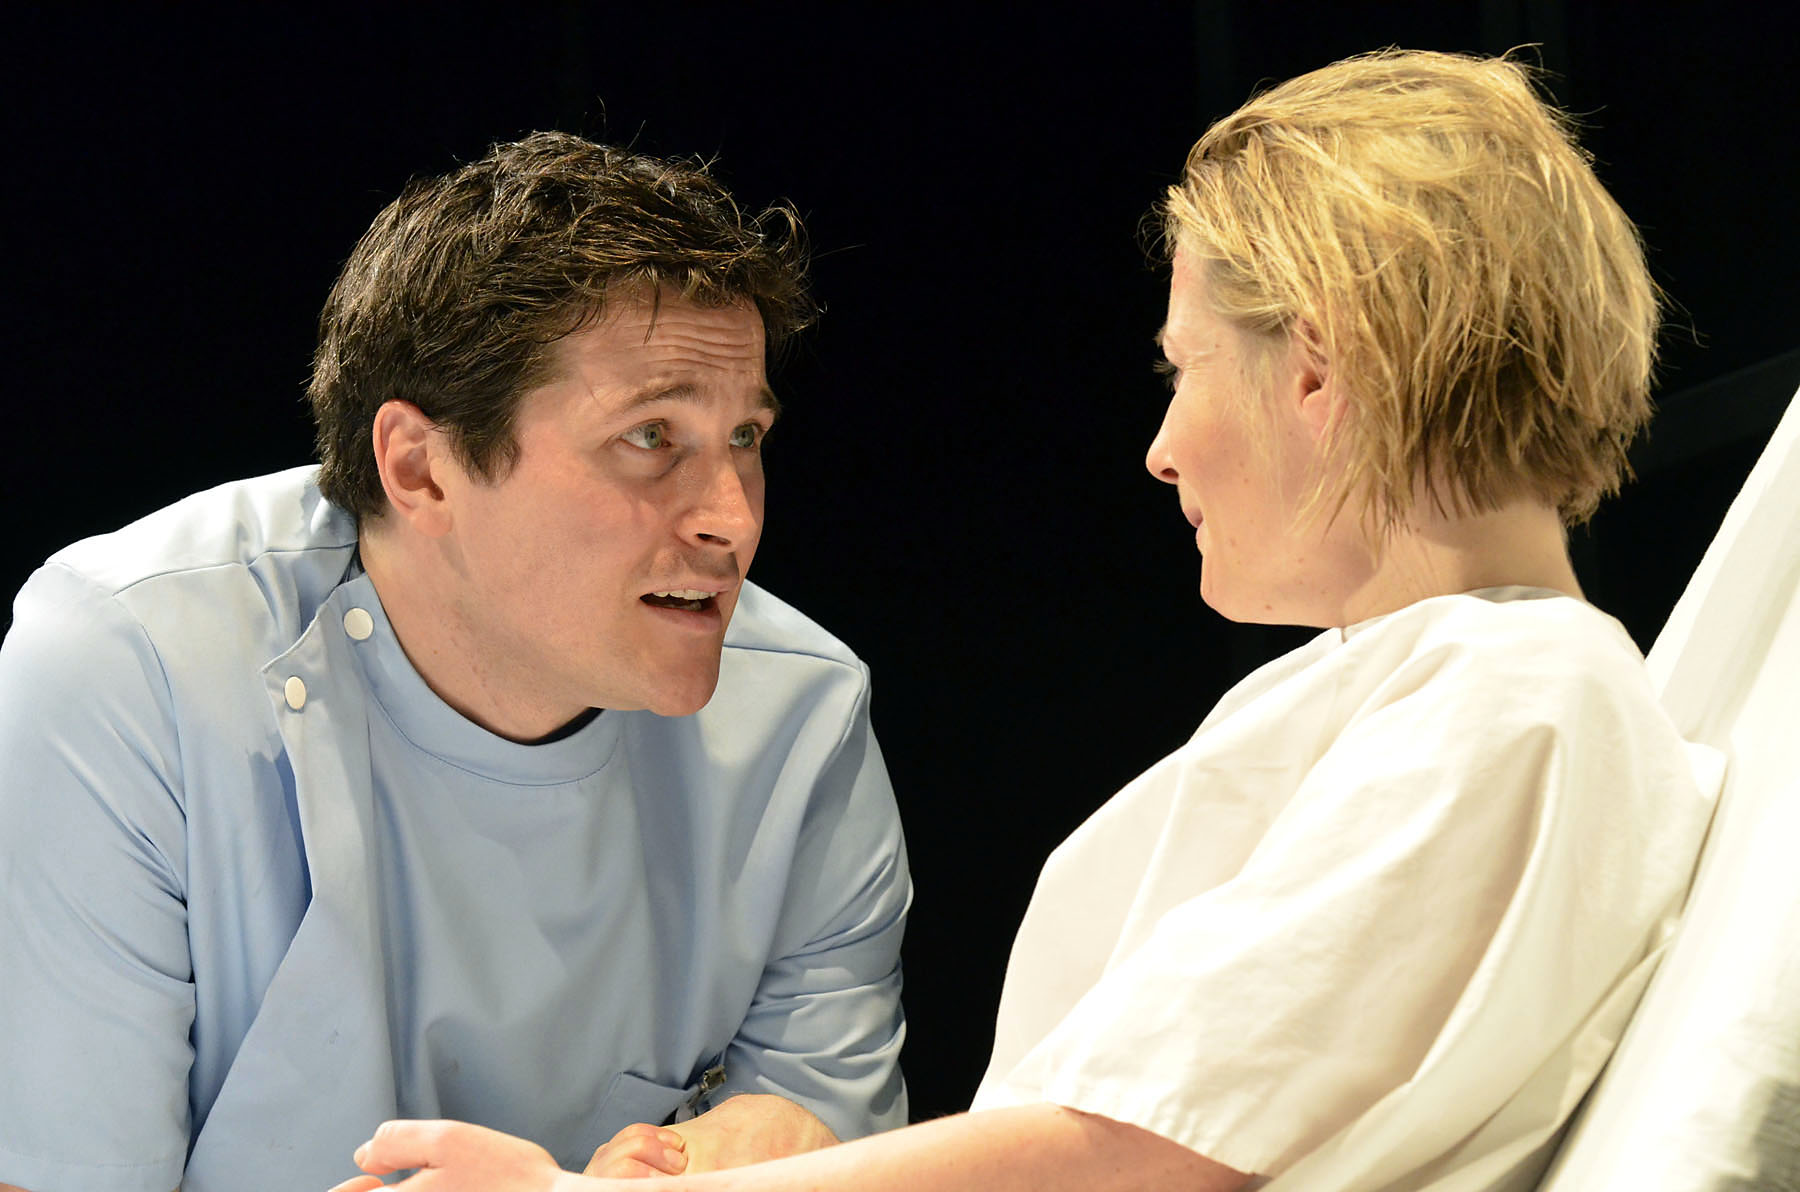 Kieran Bew (Brian) and Lisa Dillon (Lucy) in The Knot Of The Heart at the Almeida Theatre, London.